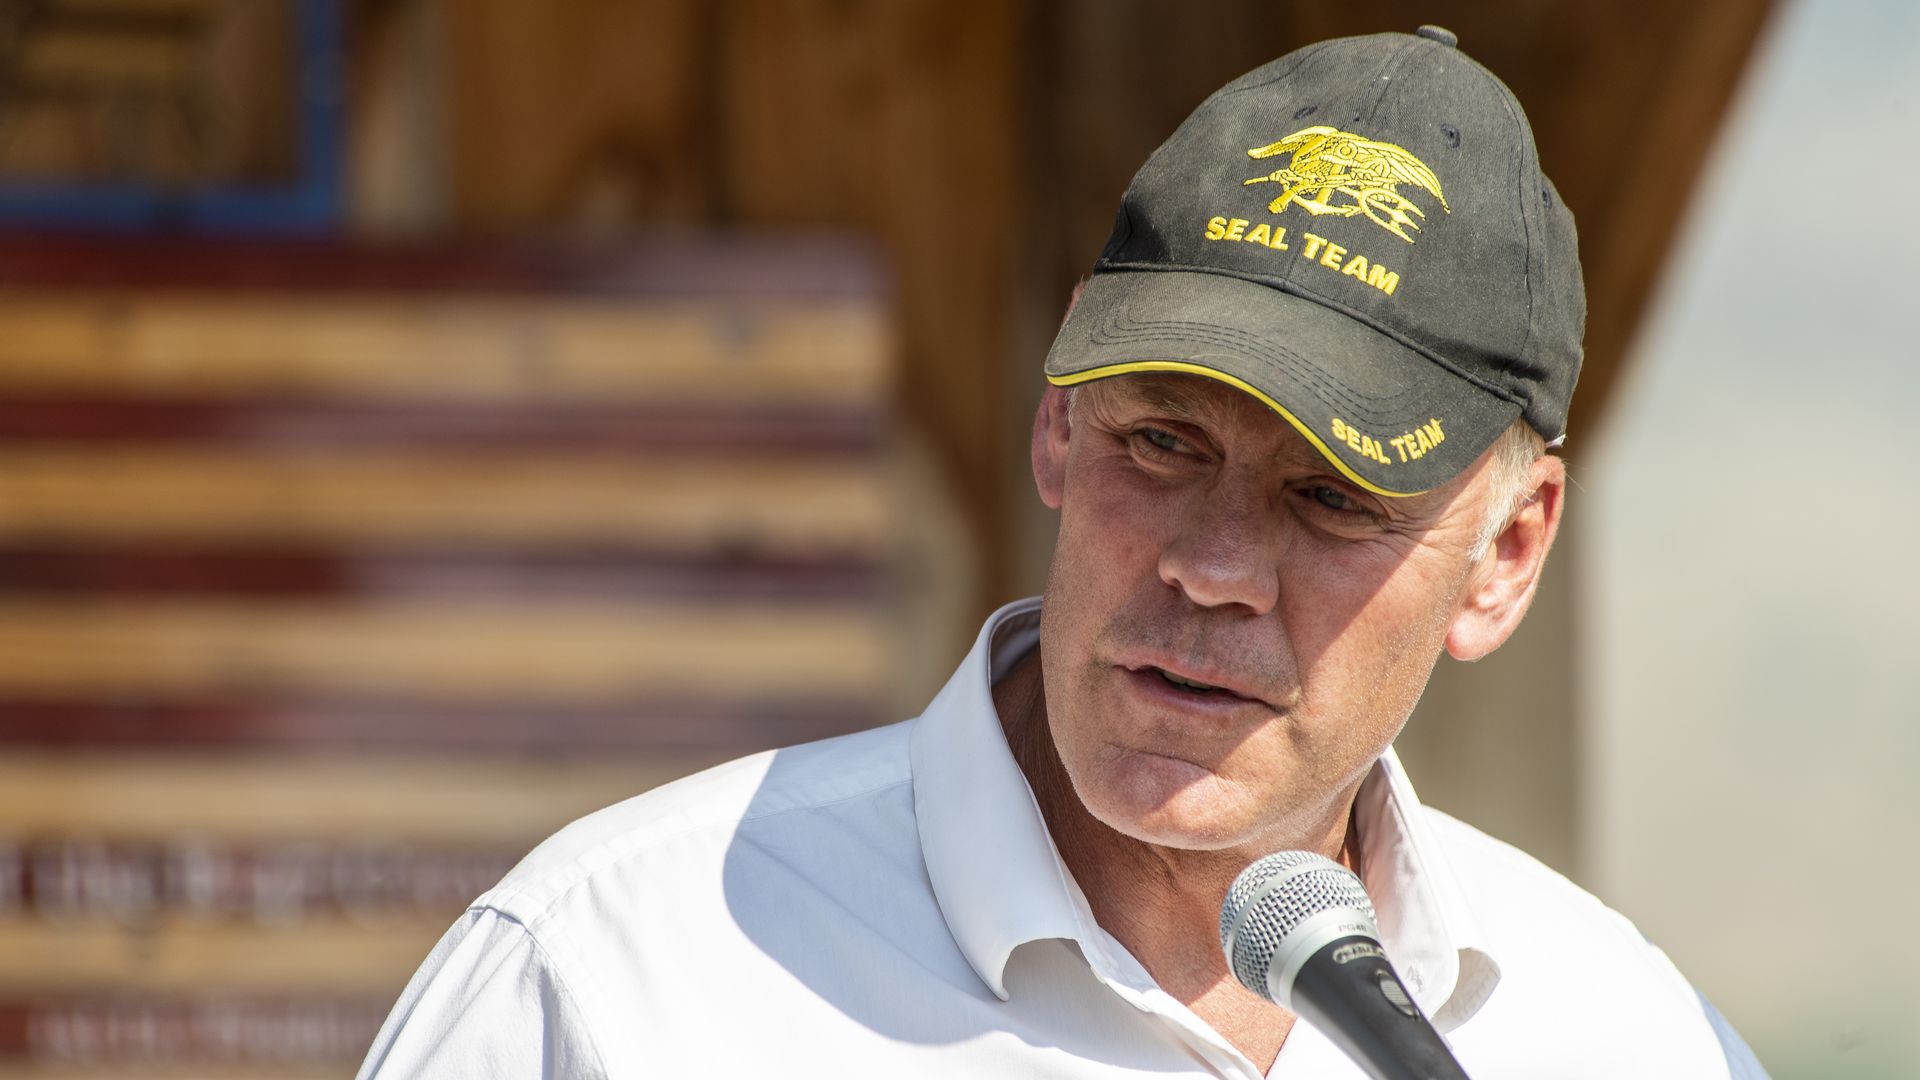 Republican Ryan Zinke, a contender for Montanas second congressional seat, at an event on July 24, 2021 in Emigrant, Montana. 